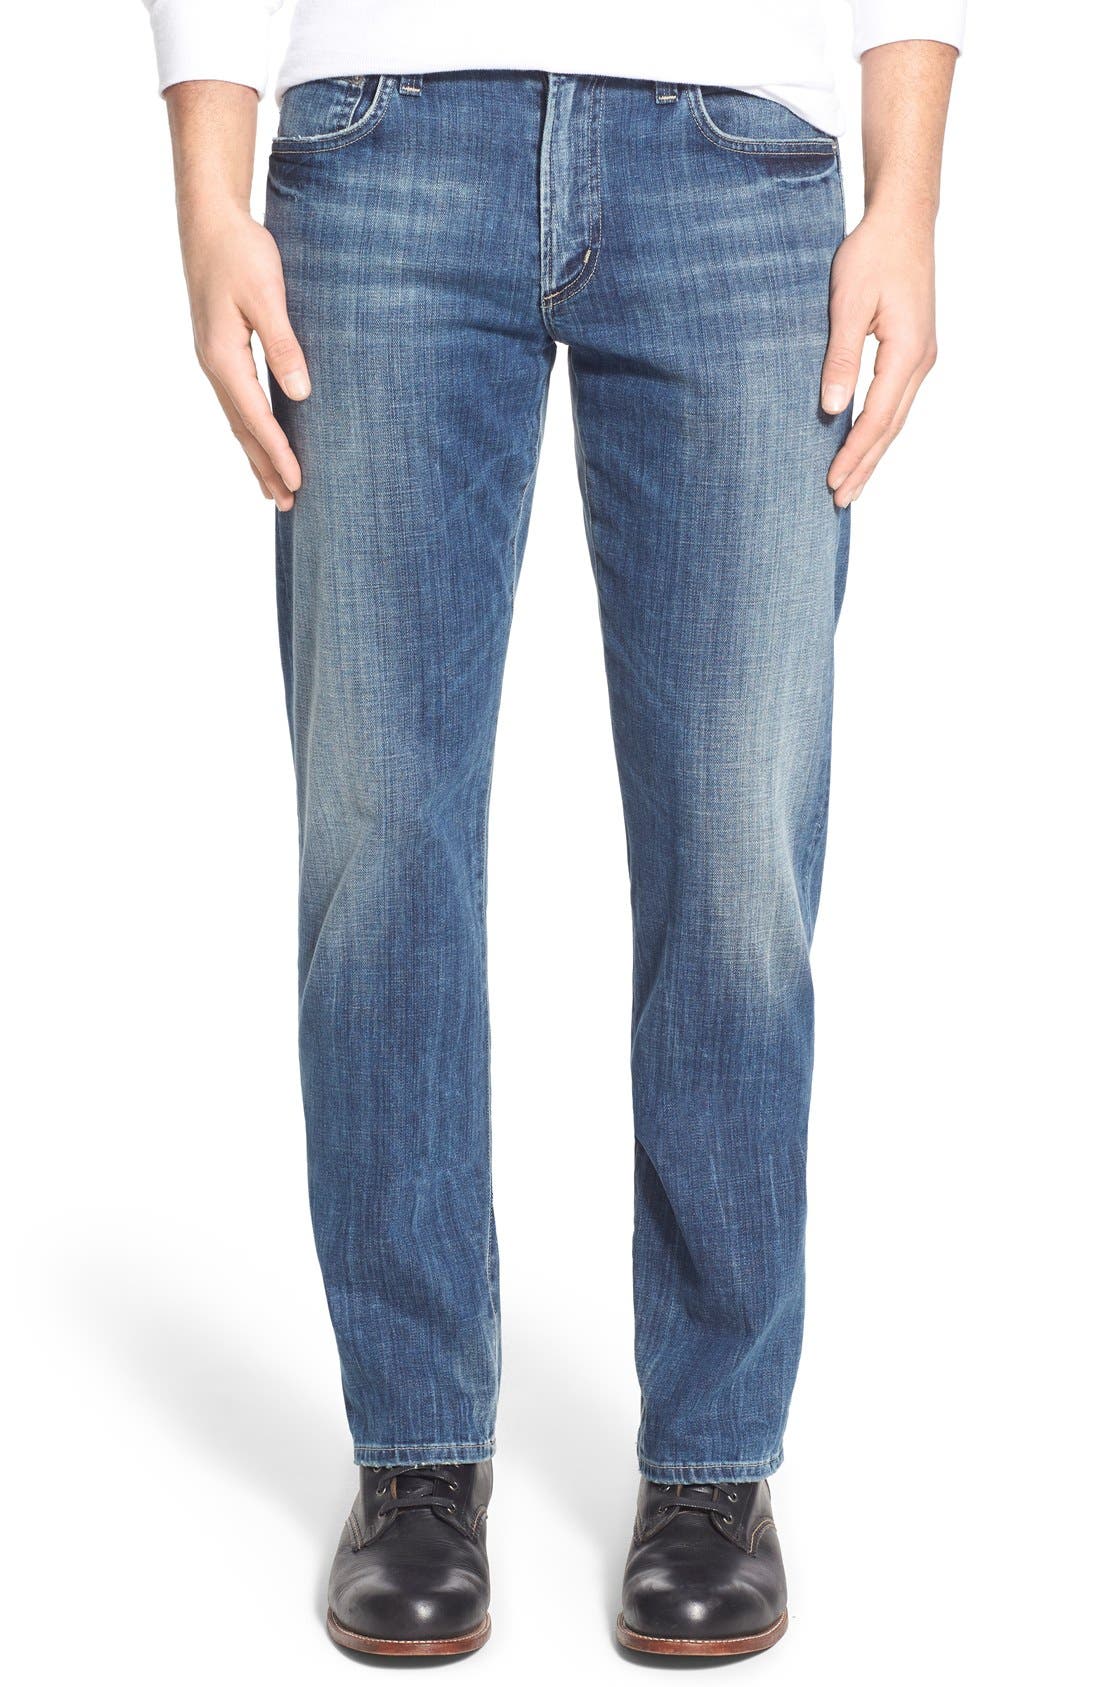 citizens of humanity men's jeans review